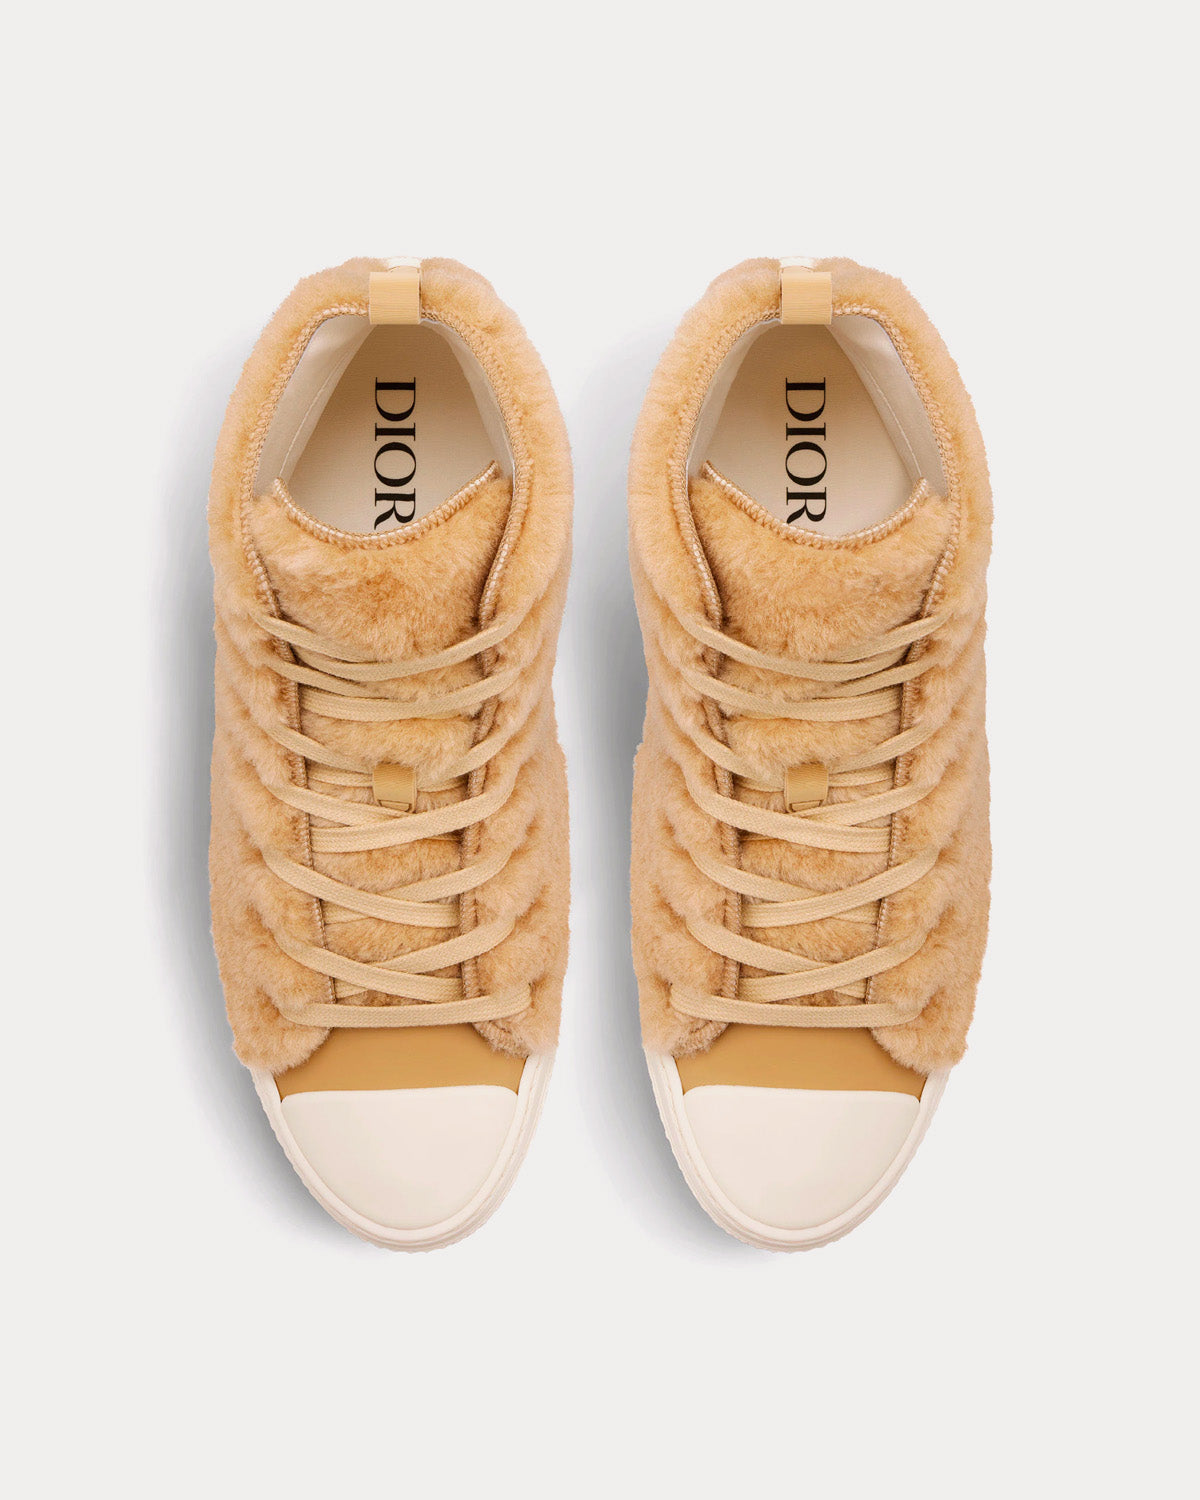 Dior x ERL - B23 Beige Shearling with Rabbit Motif High Top Sneakers